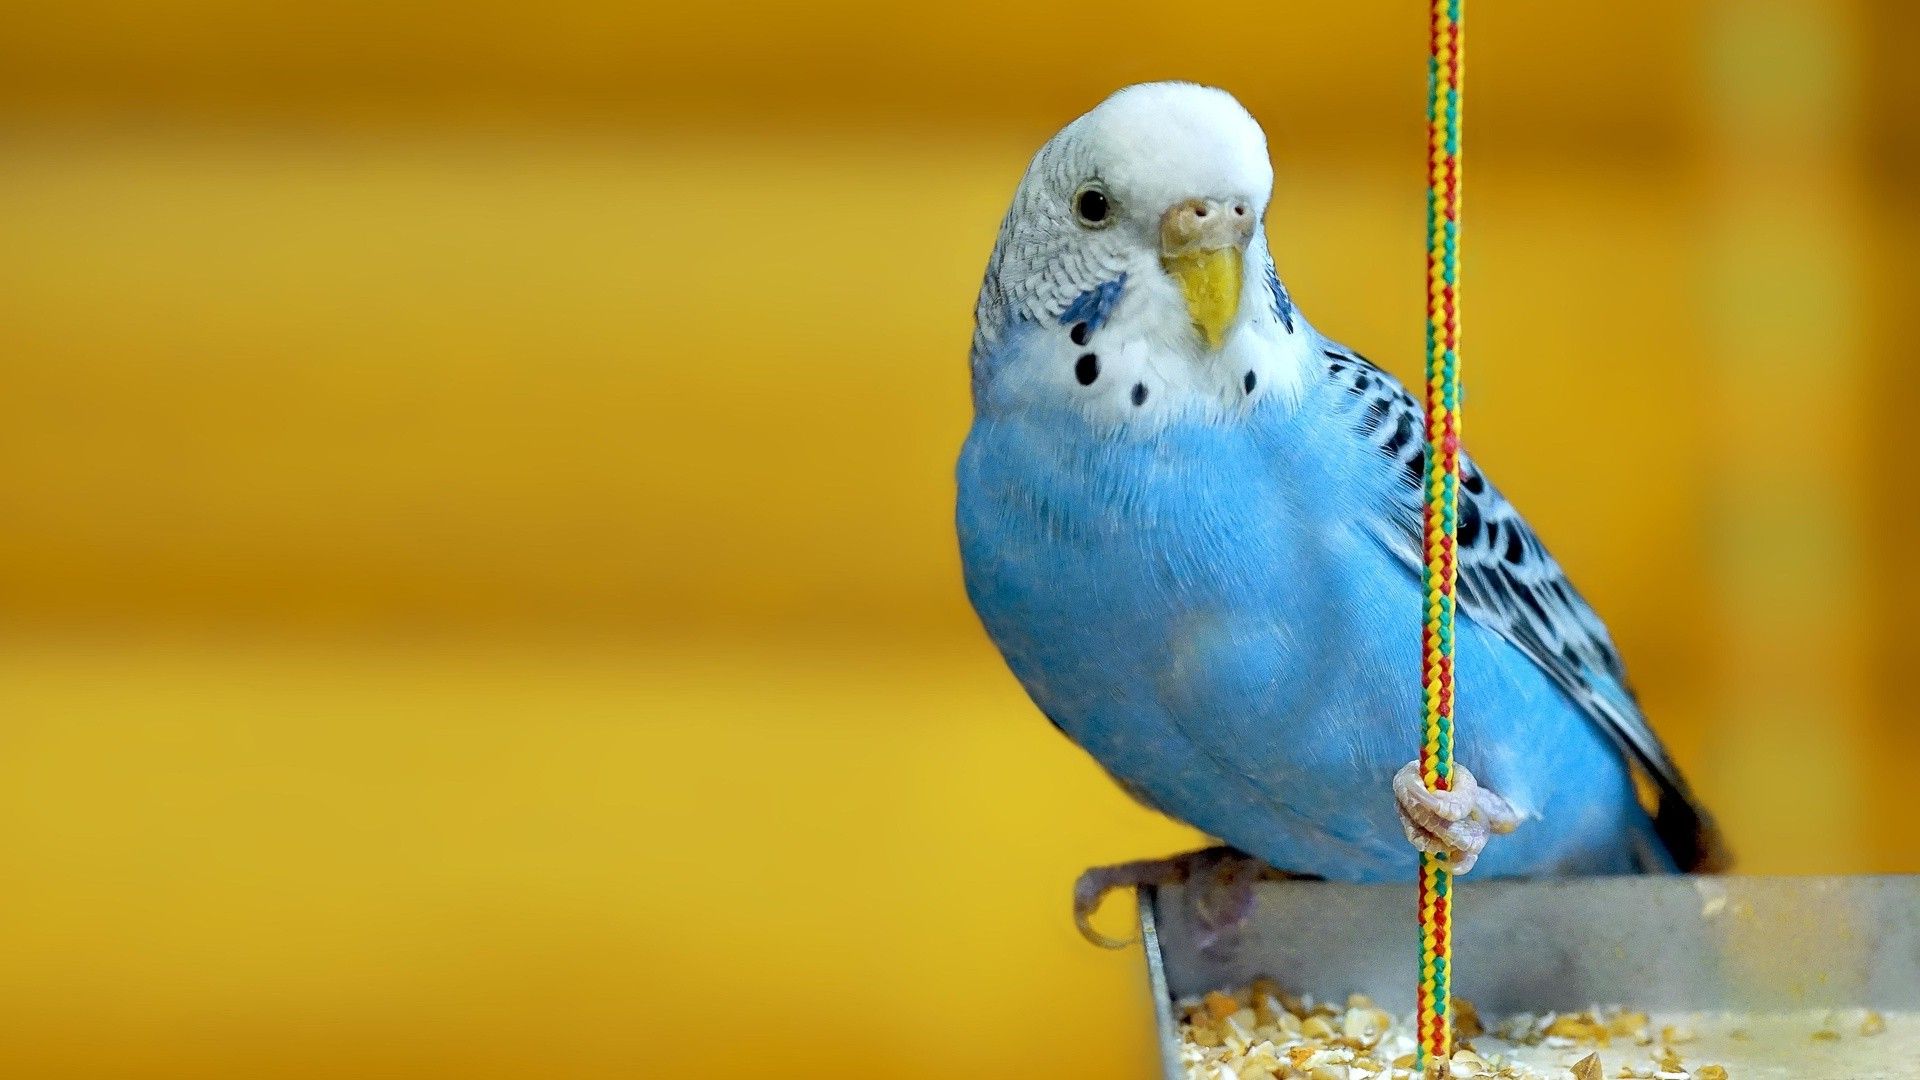 animals, Parakeets, Birds, Yellow Background Wallpaper HD / Desktop and Mobile Background